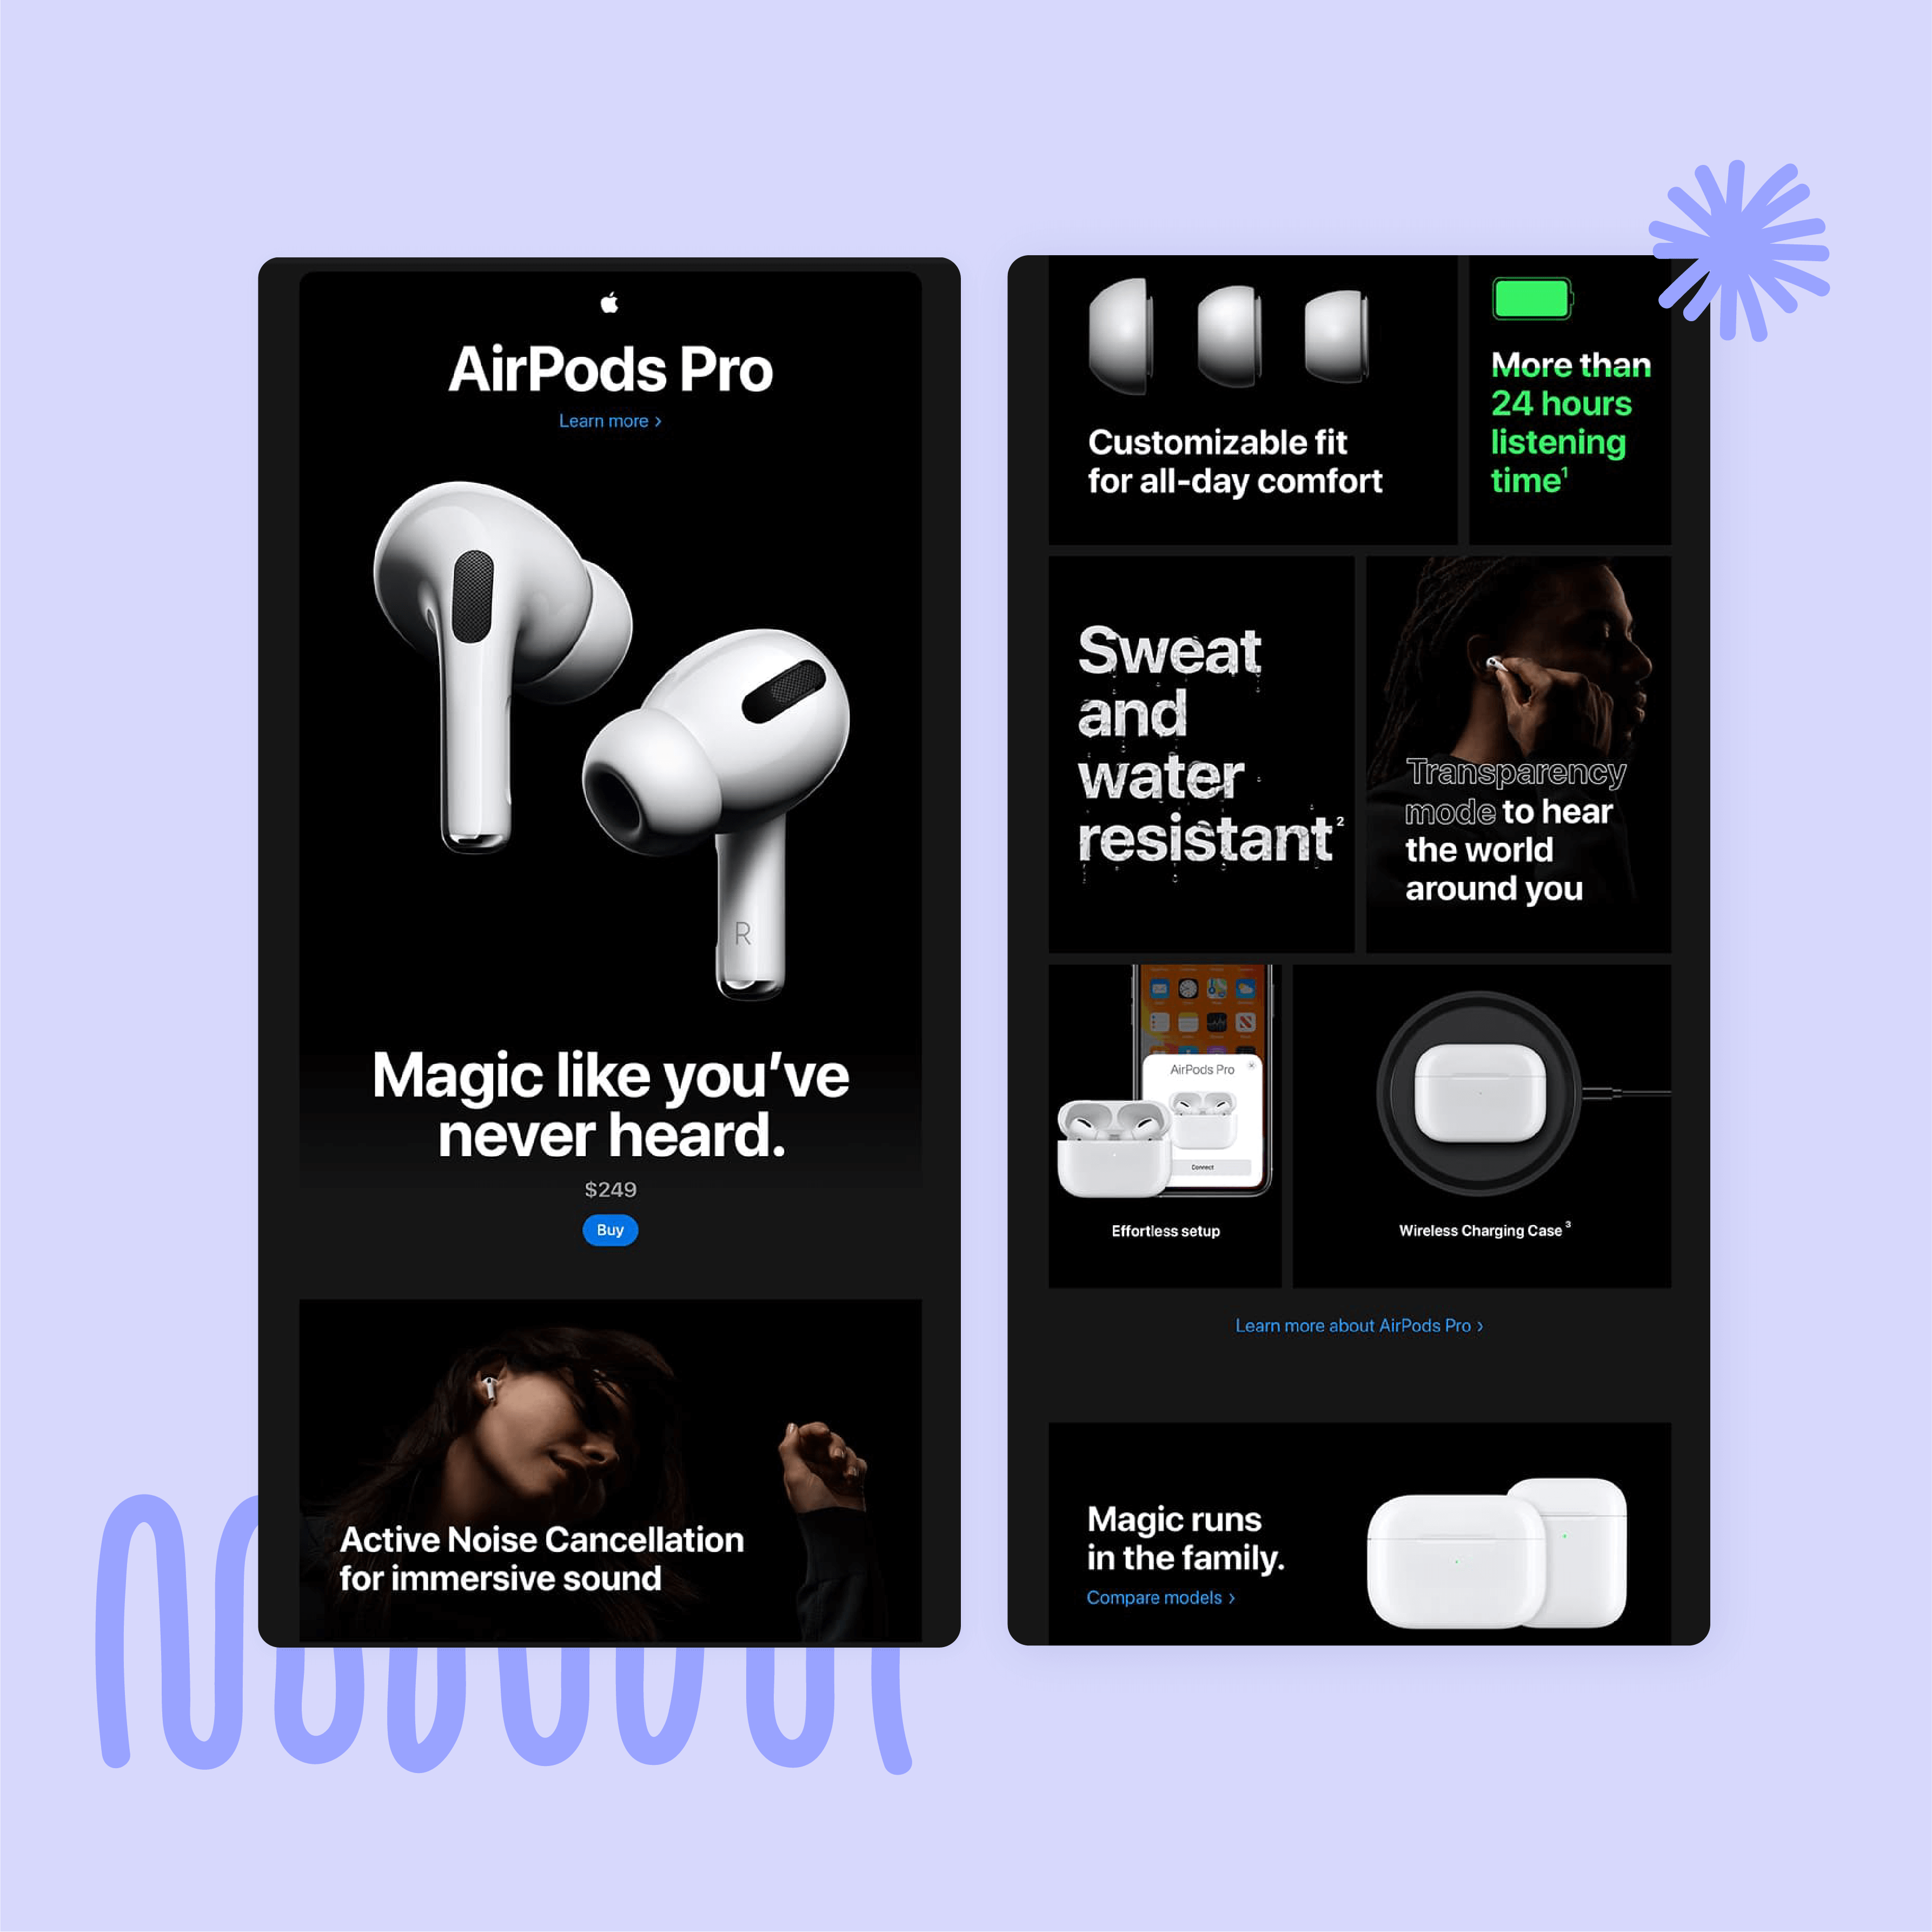 Apple airpods email for launch